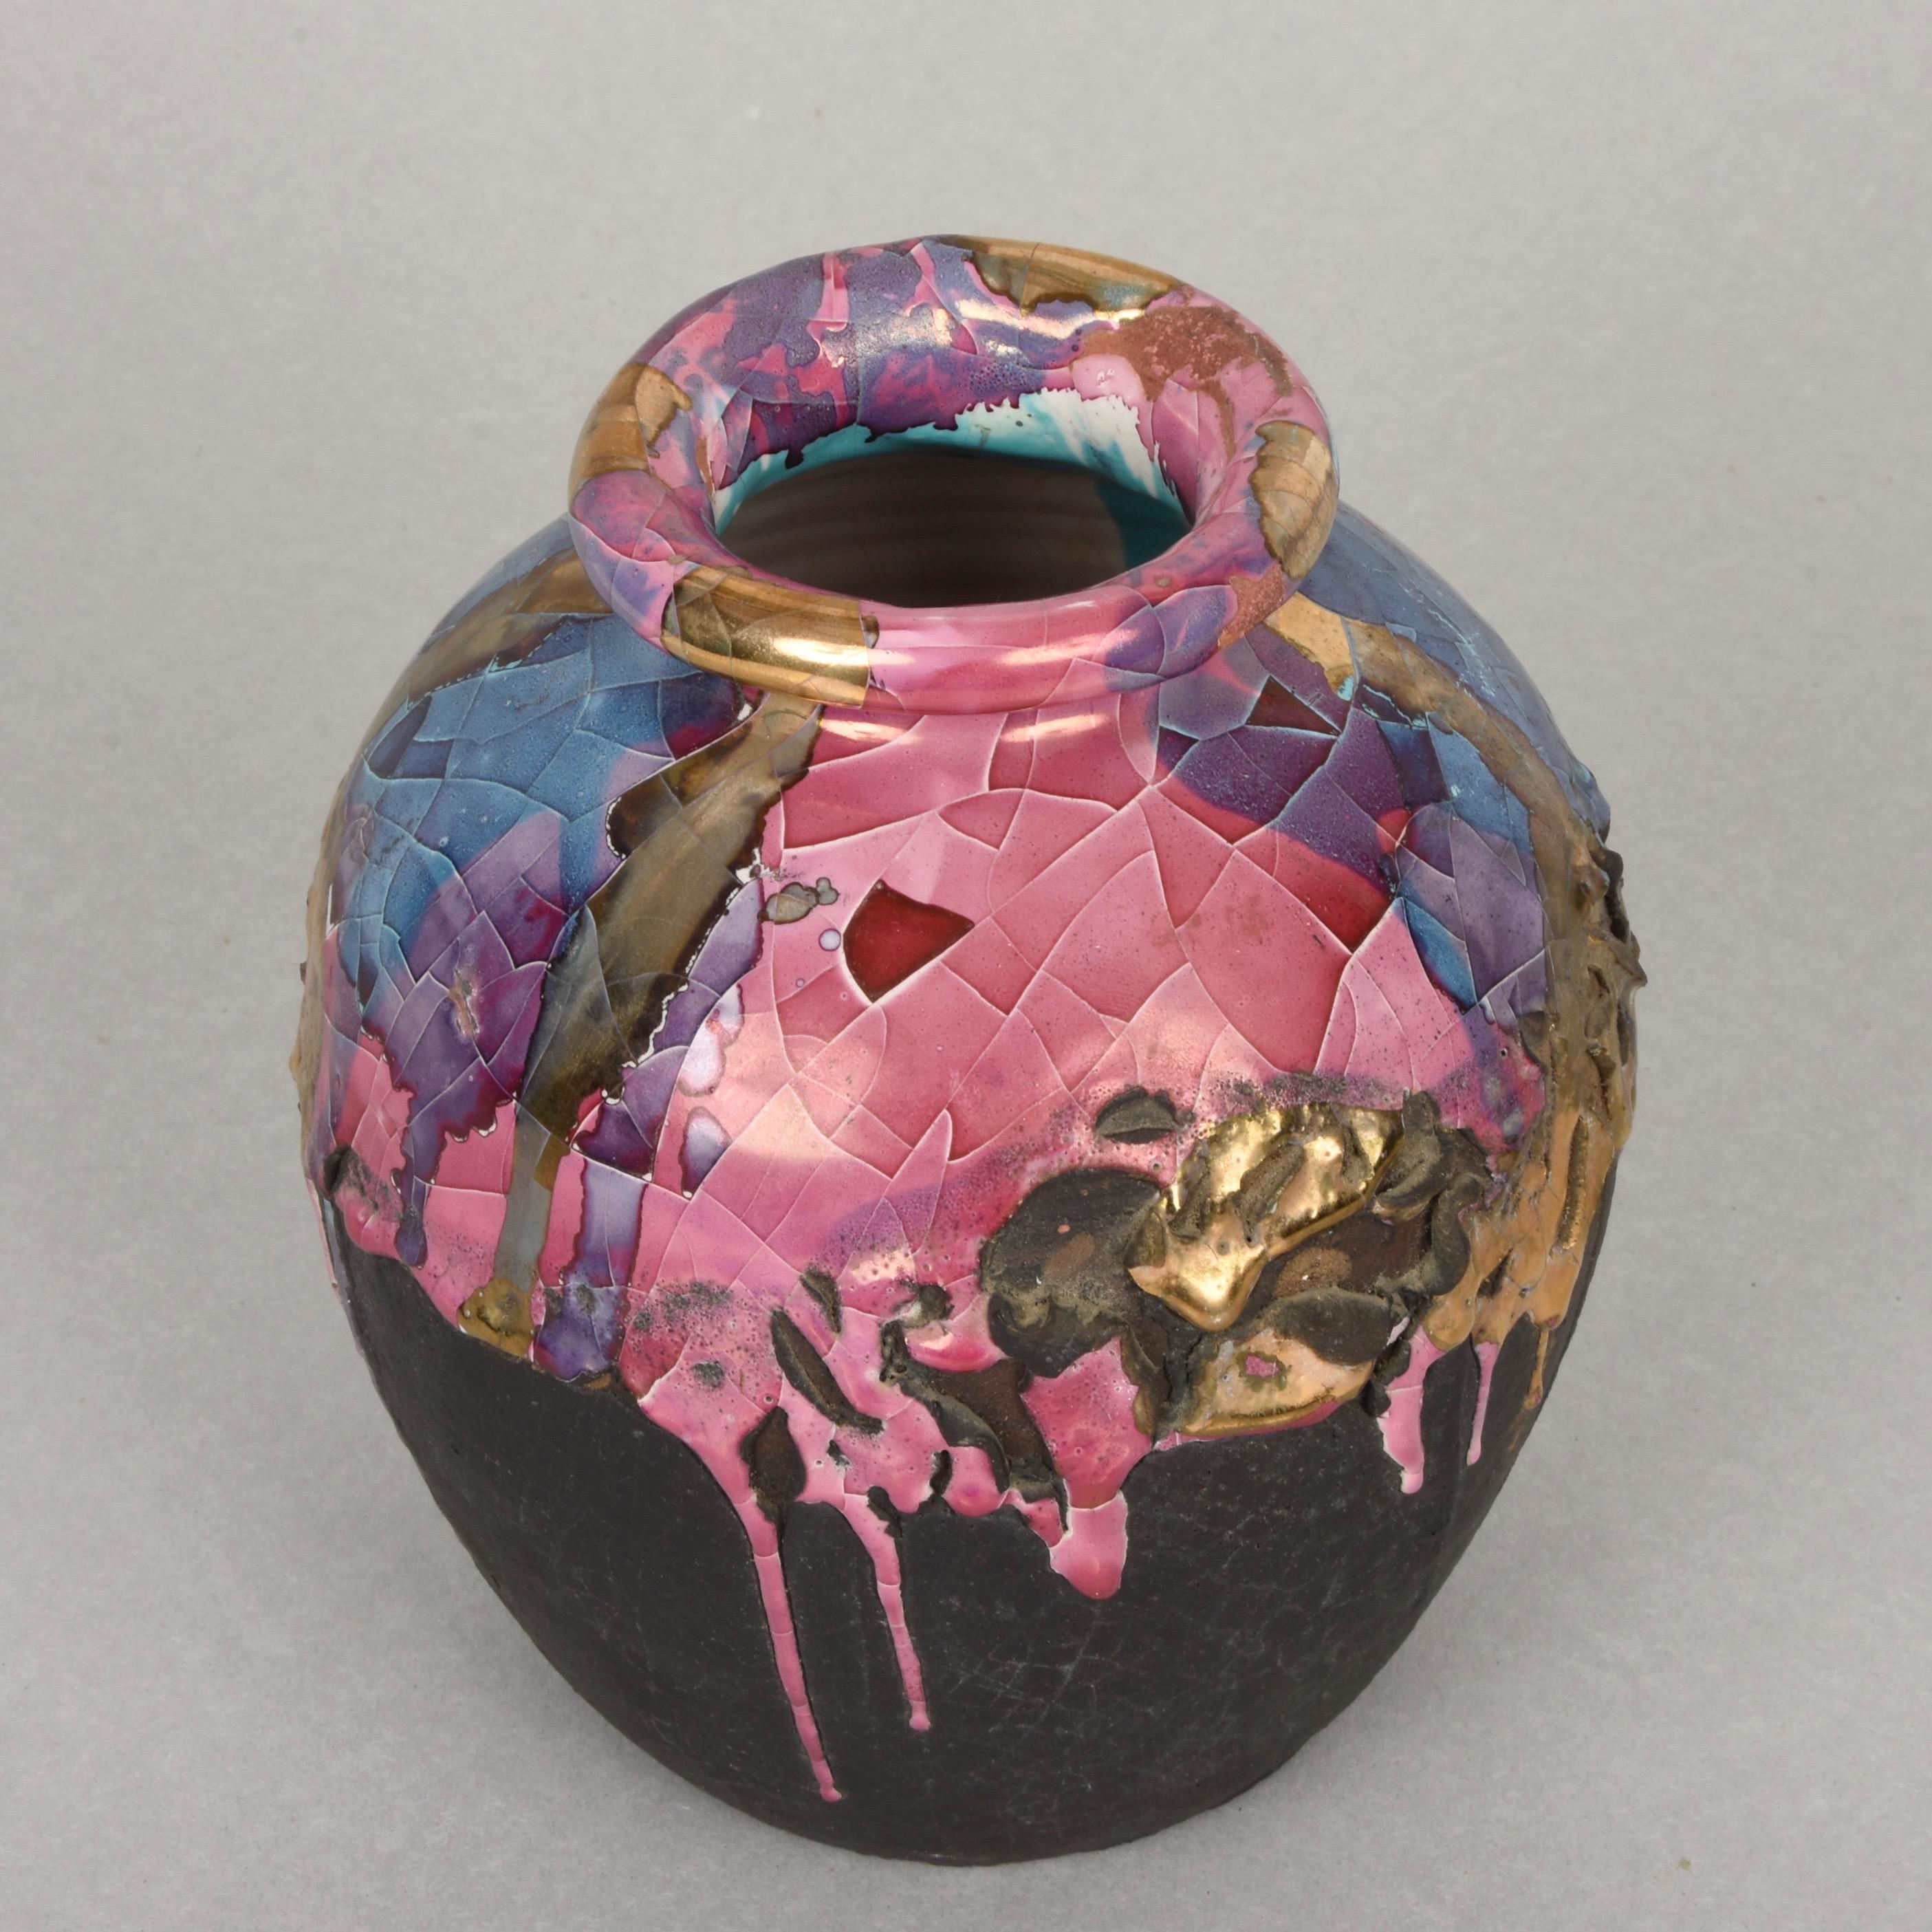 This polychrome ceramic vase is a marvellous production by Claudio Pulli, one of the greatest Sardinian artists of the 20th century.

The vase was produced for I.S.O.L.A. and is made of enamelled ceramic, coloured with nail polish with metallic